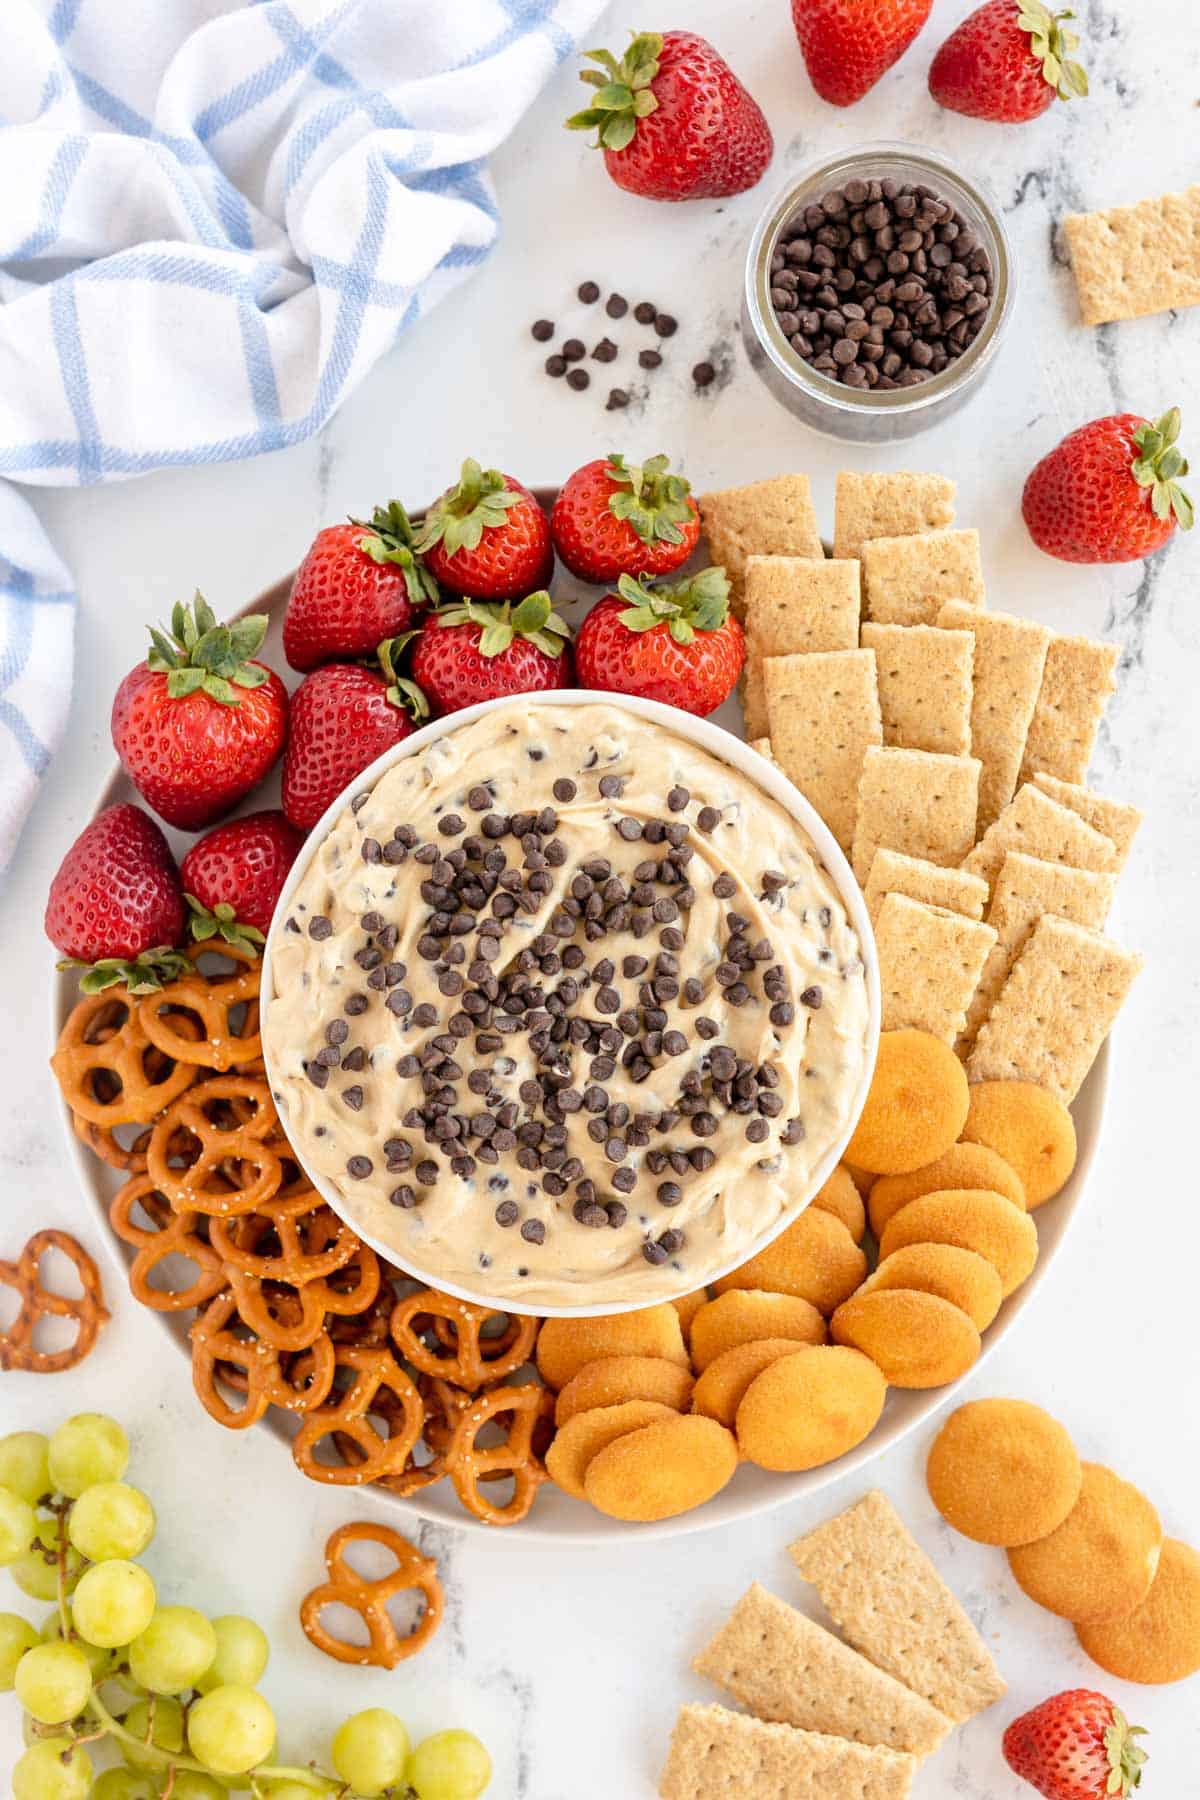 Chocolate chip cookie dough dip with strawberries and pretzels. Keywords: Cookie Dough Dip